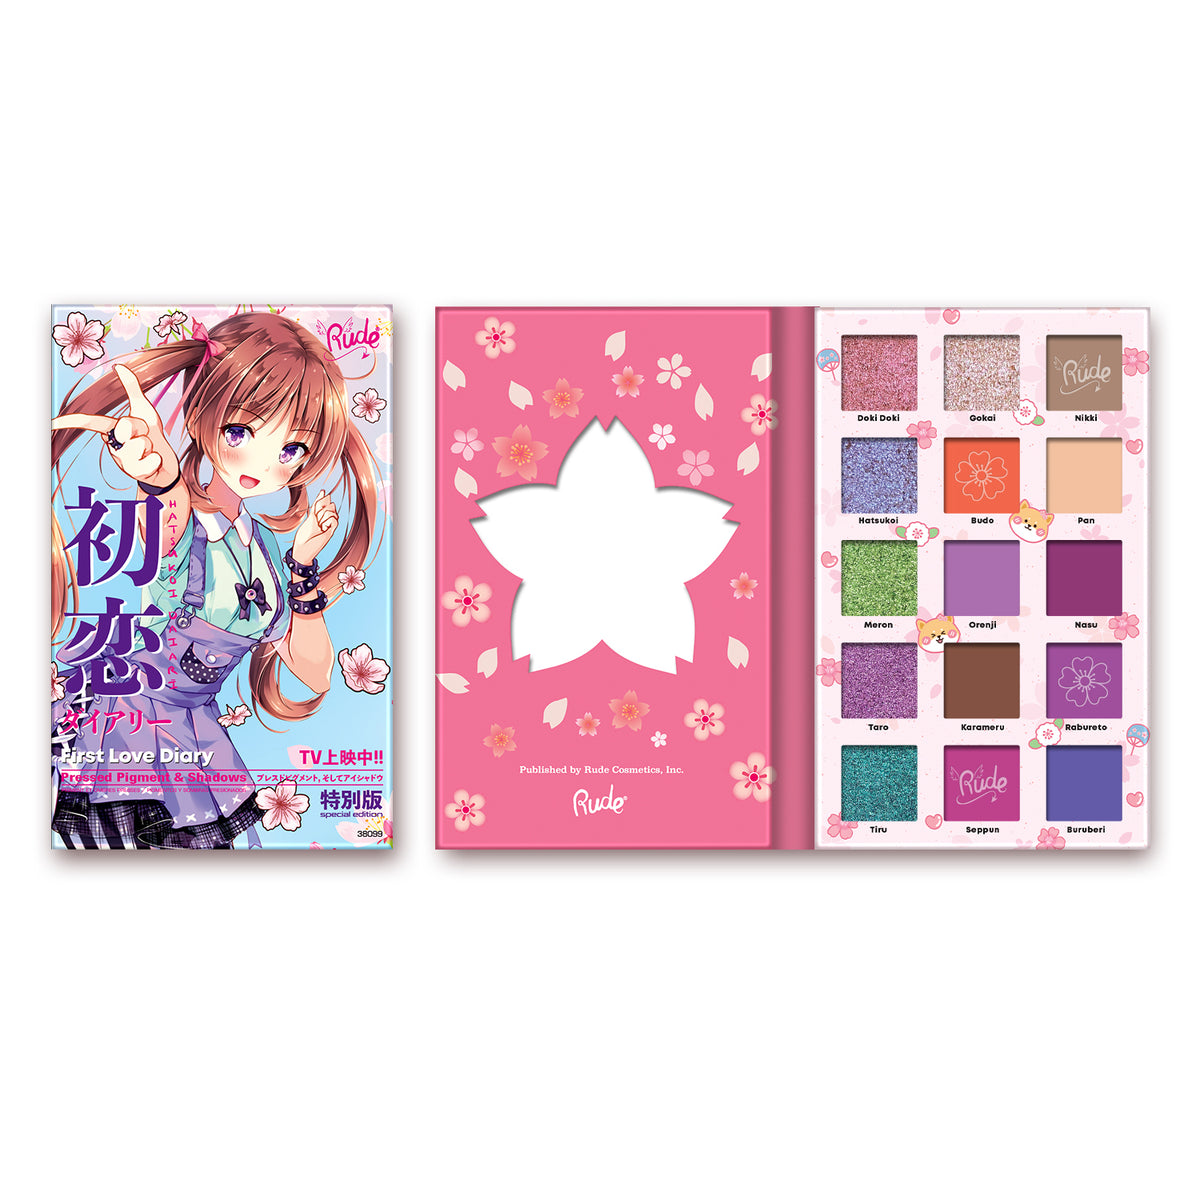 Manga Collection Pressed Pigments & Shadows - Cat Girl Chronicles by Rude  Cosmetics